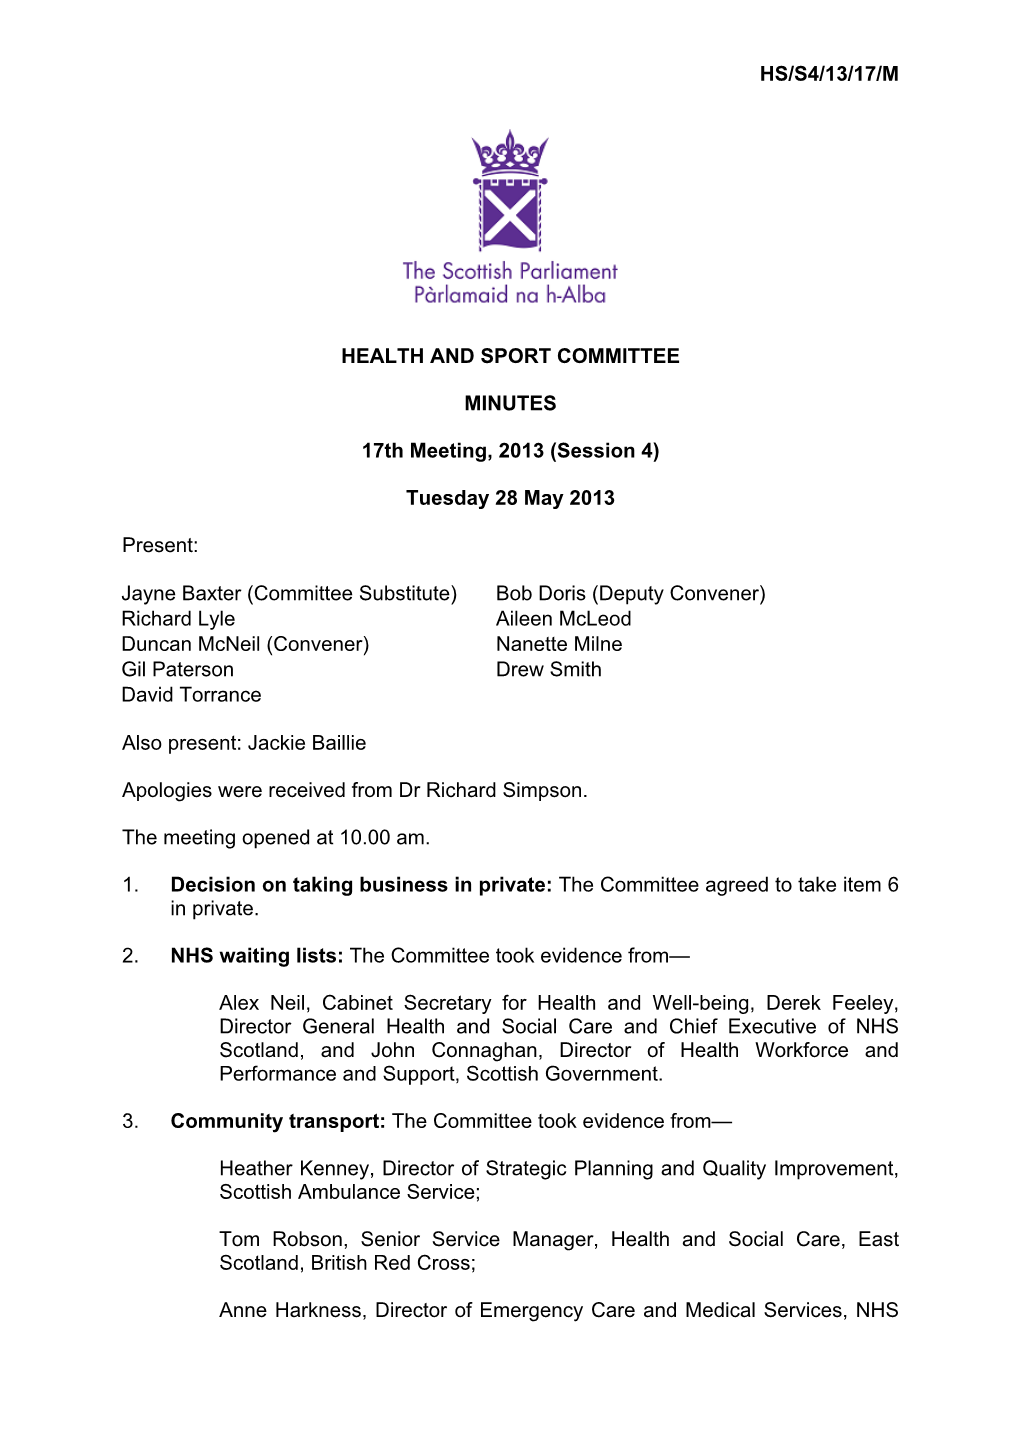 HS/S4/13/17/M HEALTH and SPORT COMMITTEE MINUTES 17Th Meeting, 2013 (Session 4) Tuesday 28 May 2013 Present: Jayne Baxter (Commi